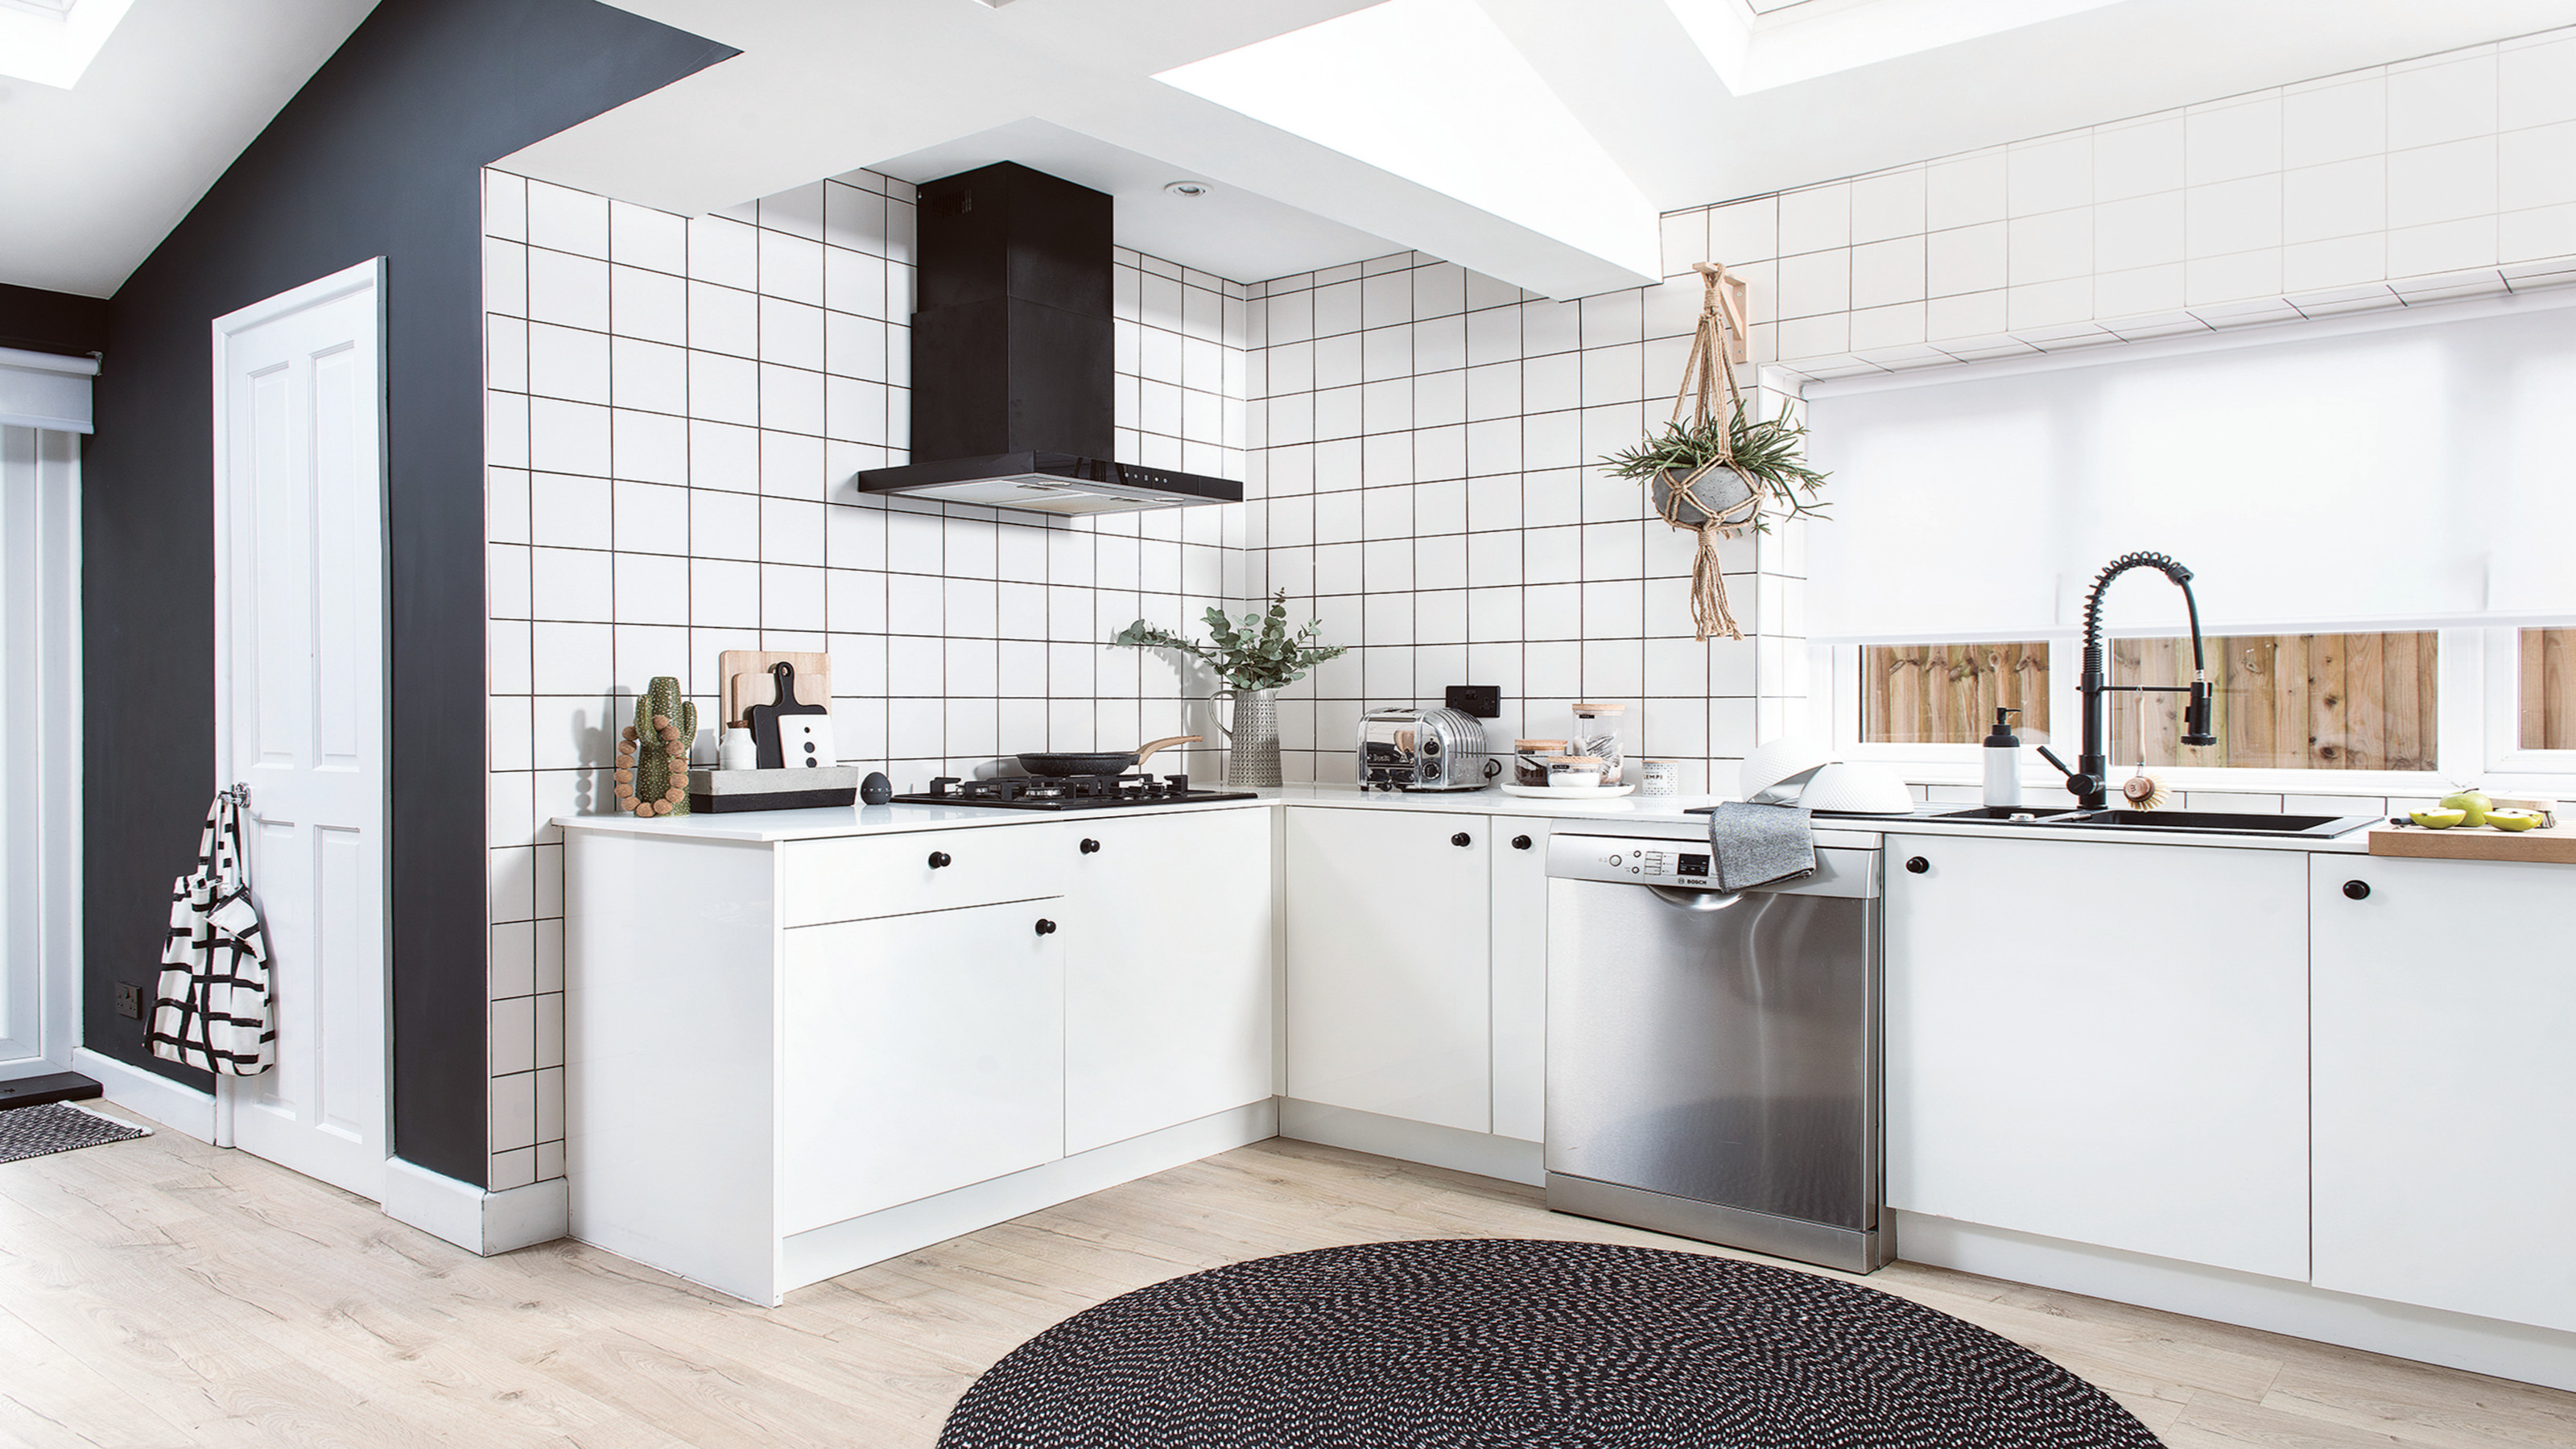 Want a Timeless Kitchen? Avoid These 5 Design Mistakes